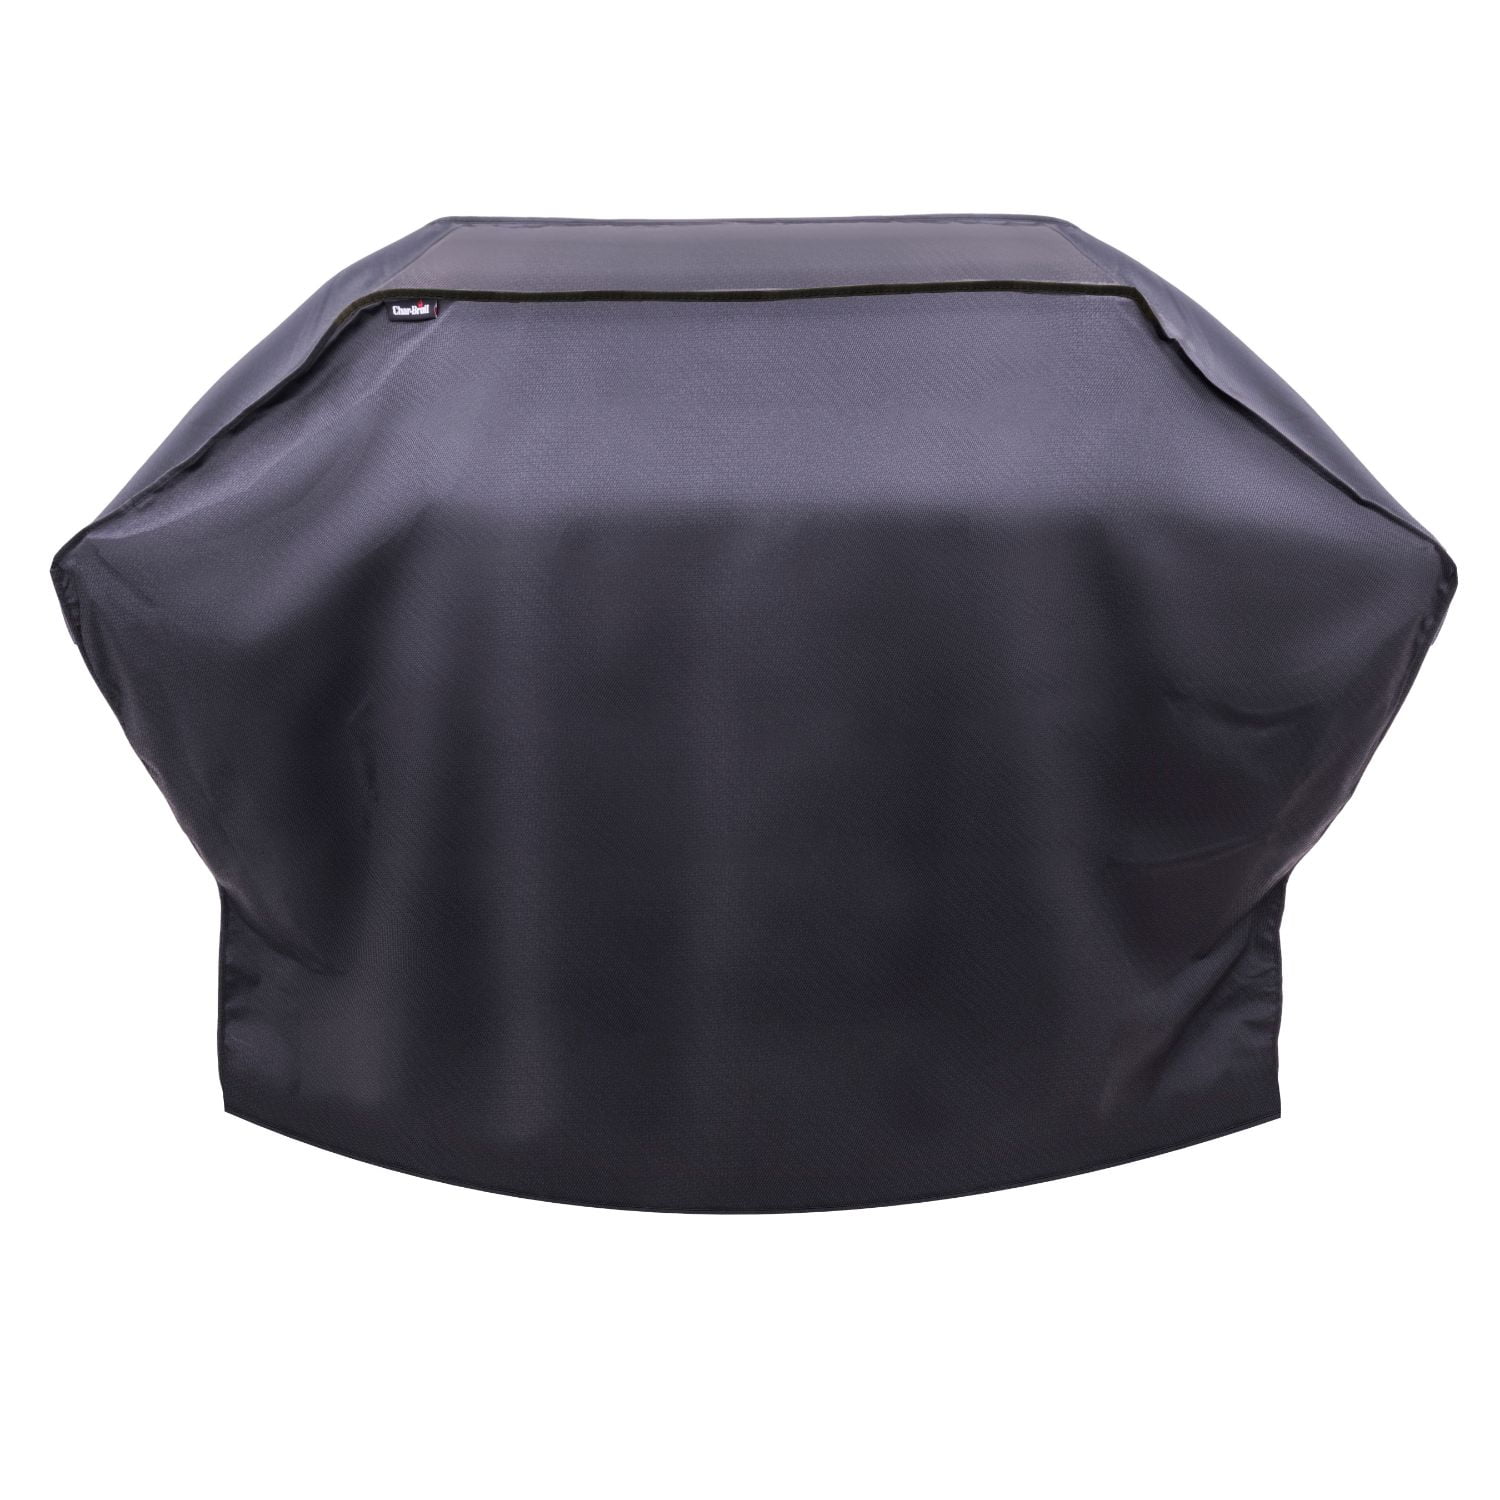 Char-Broil 2655579P04 X-large 5 Plus Burner Performance Grill Cover for sale online 